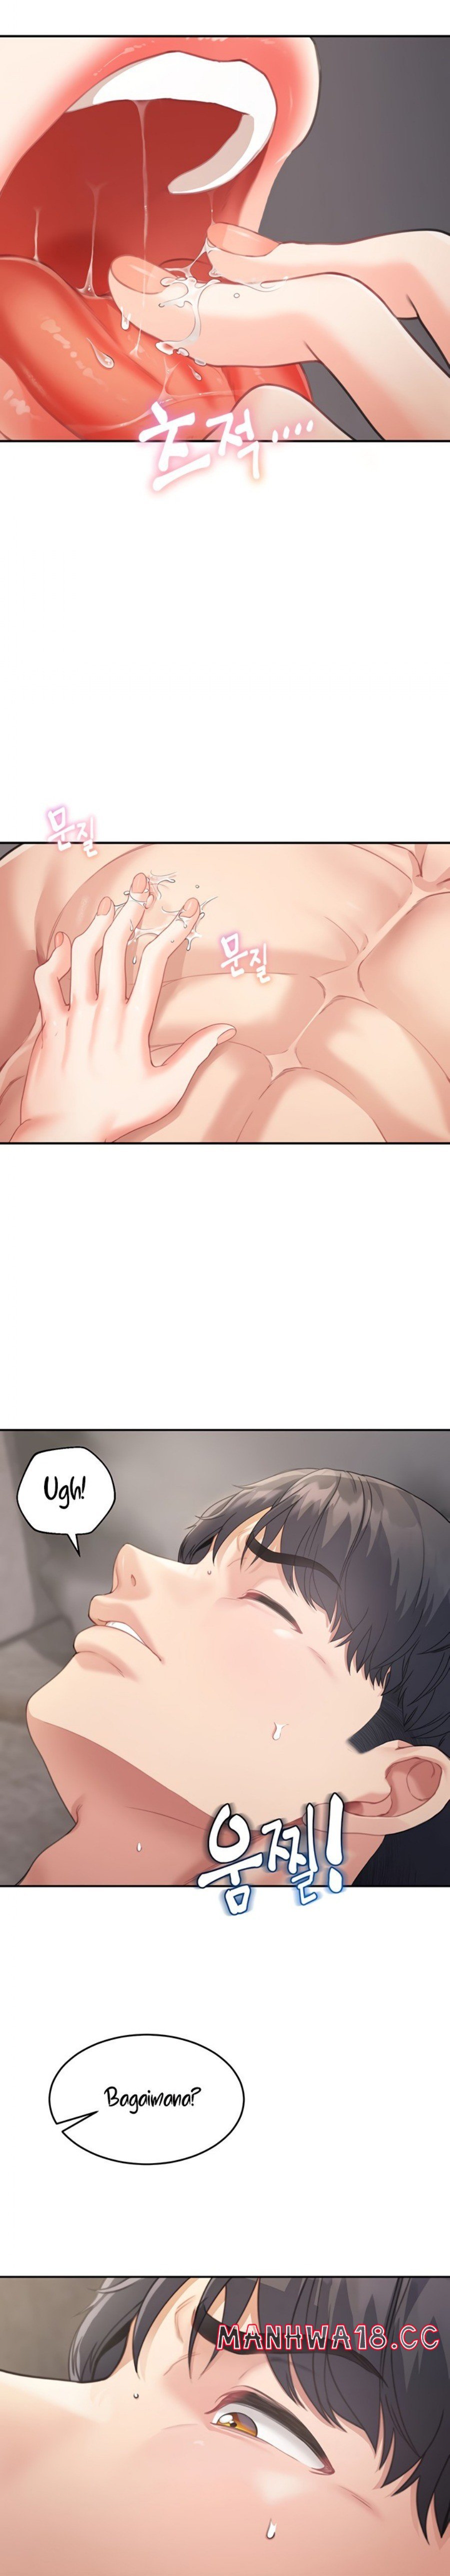 is-it-your-mother-or-sister-raw-chap-3-18